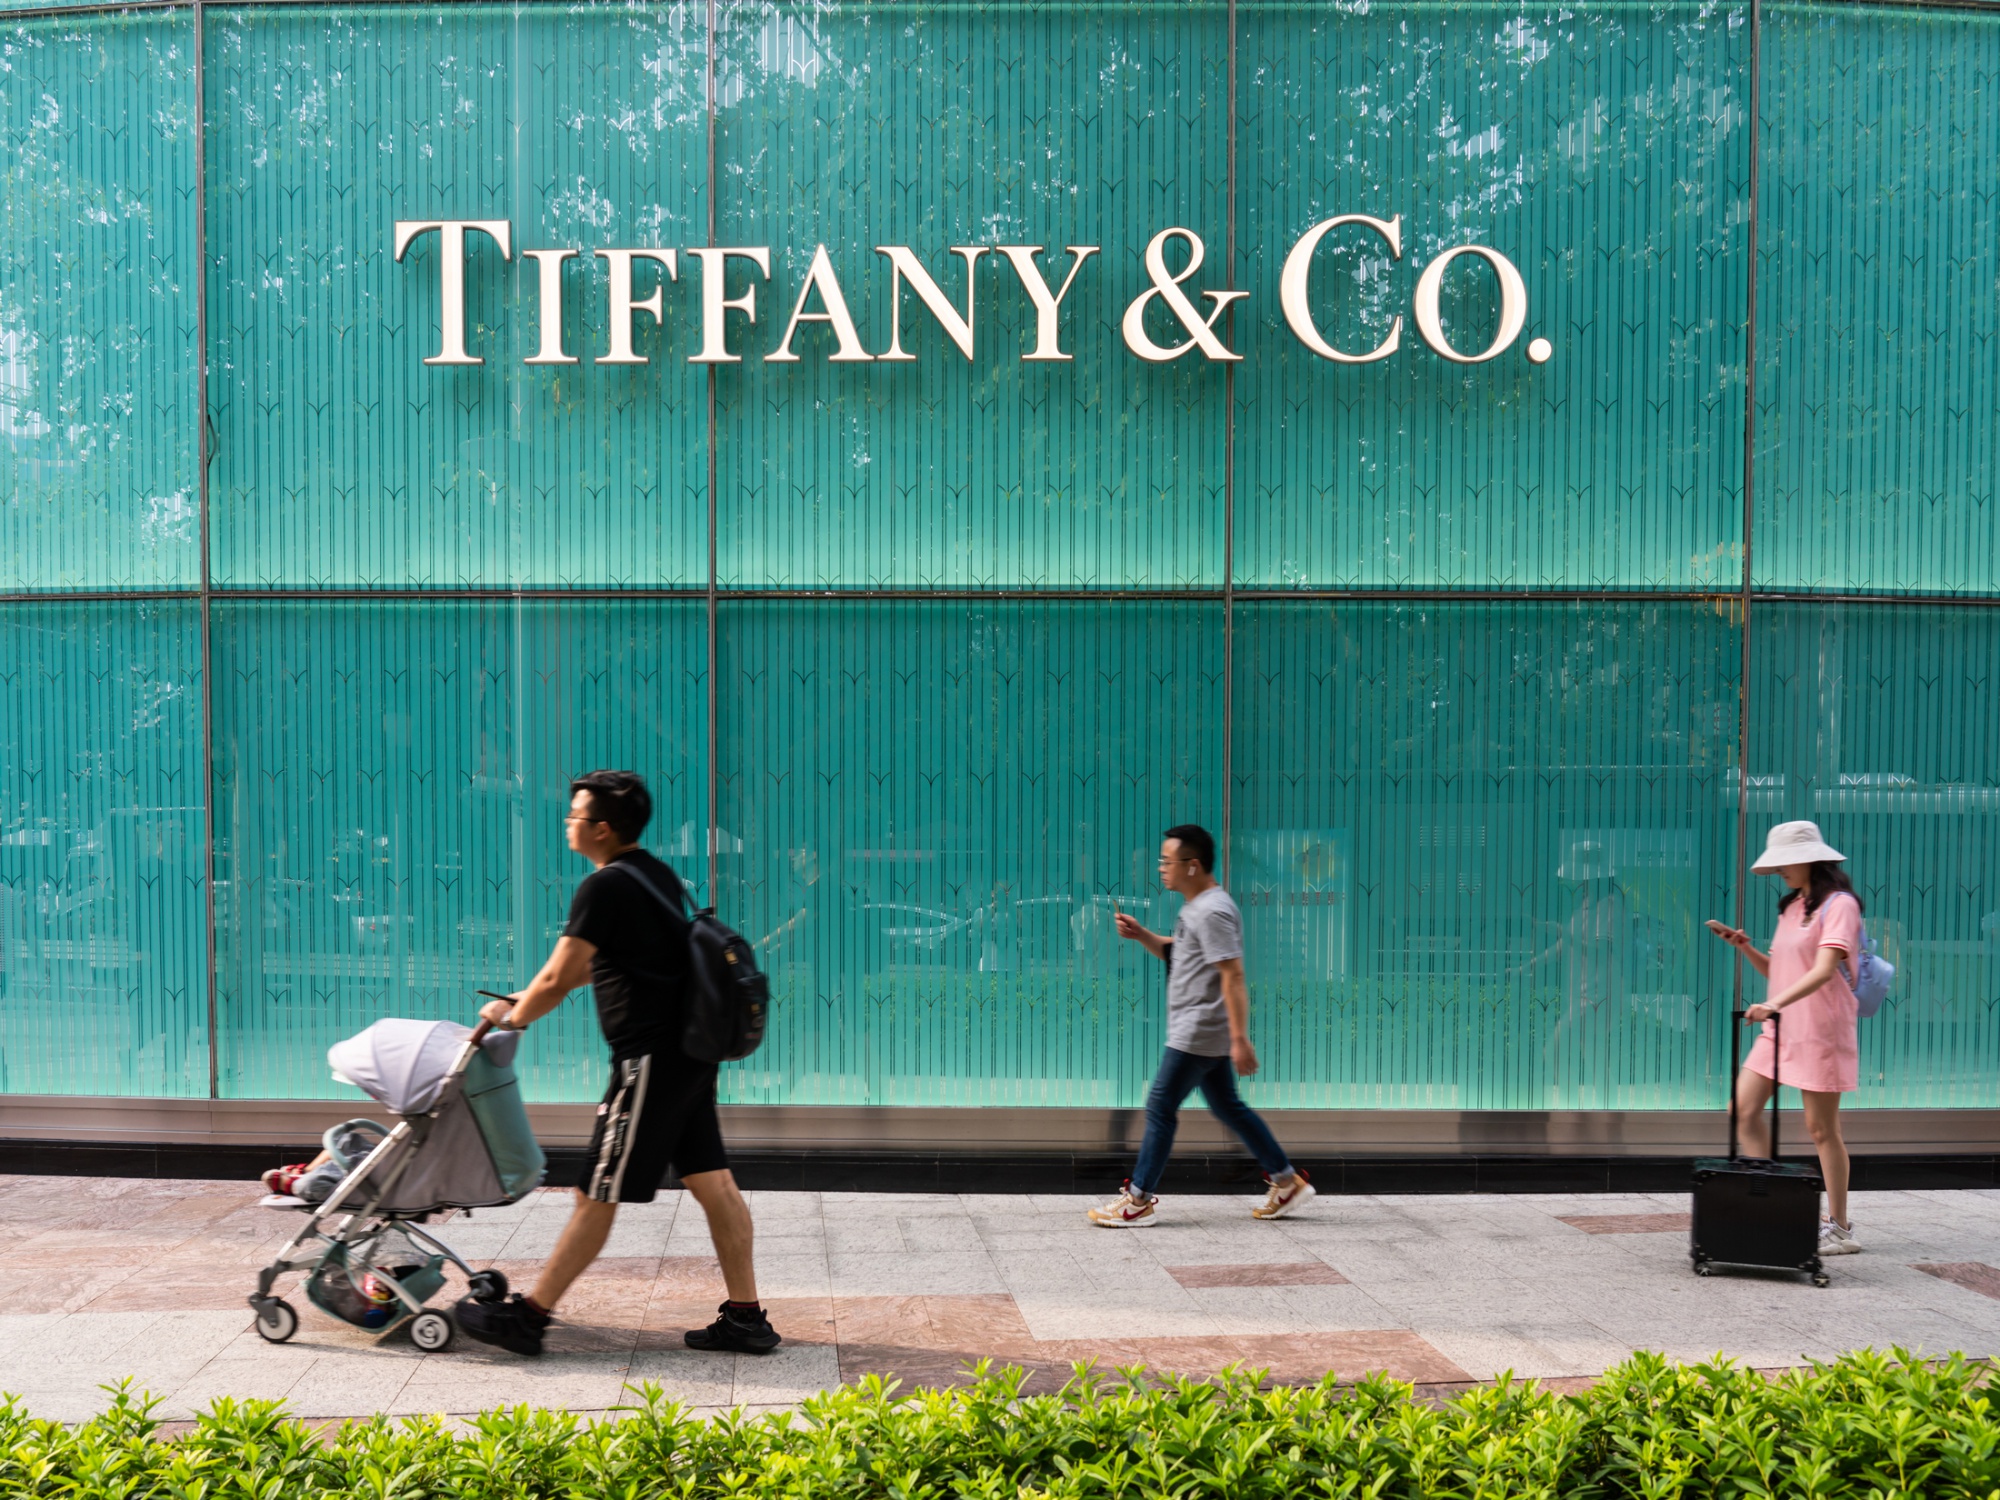 LVMH to Acquire Tiffany at a Discount - InsideHook